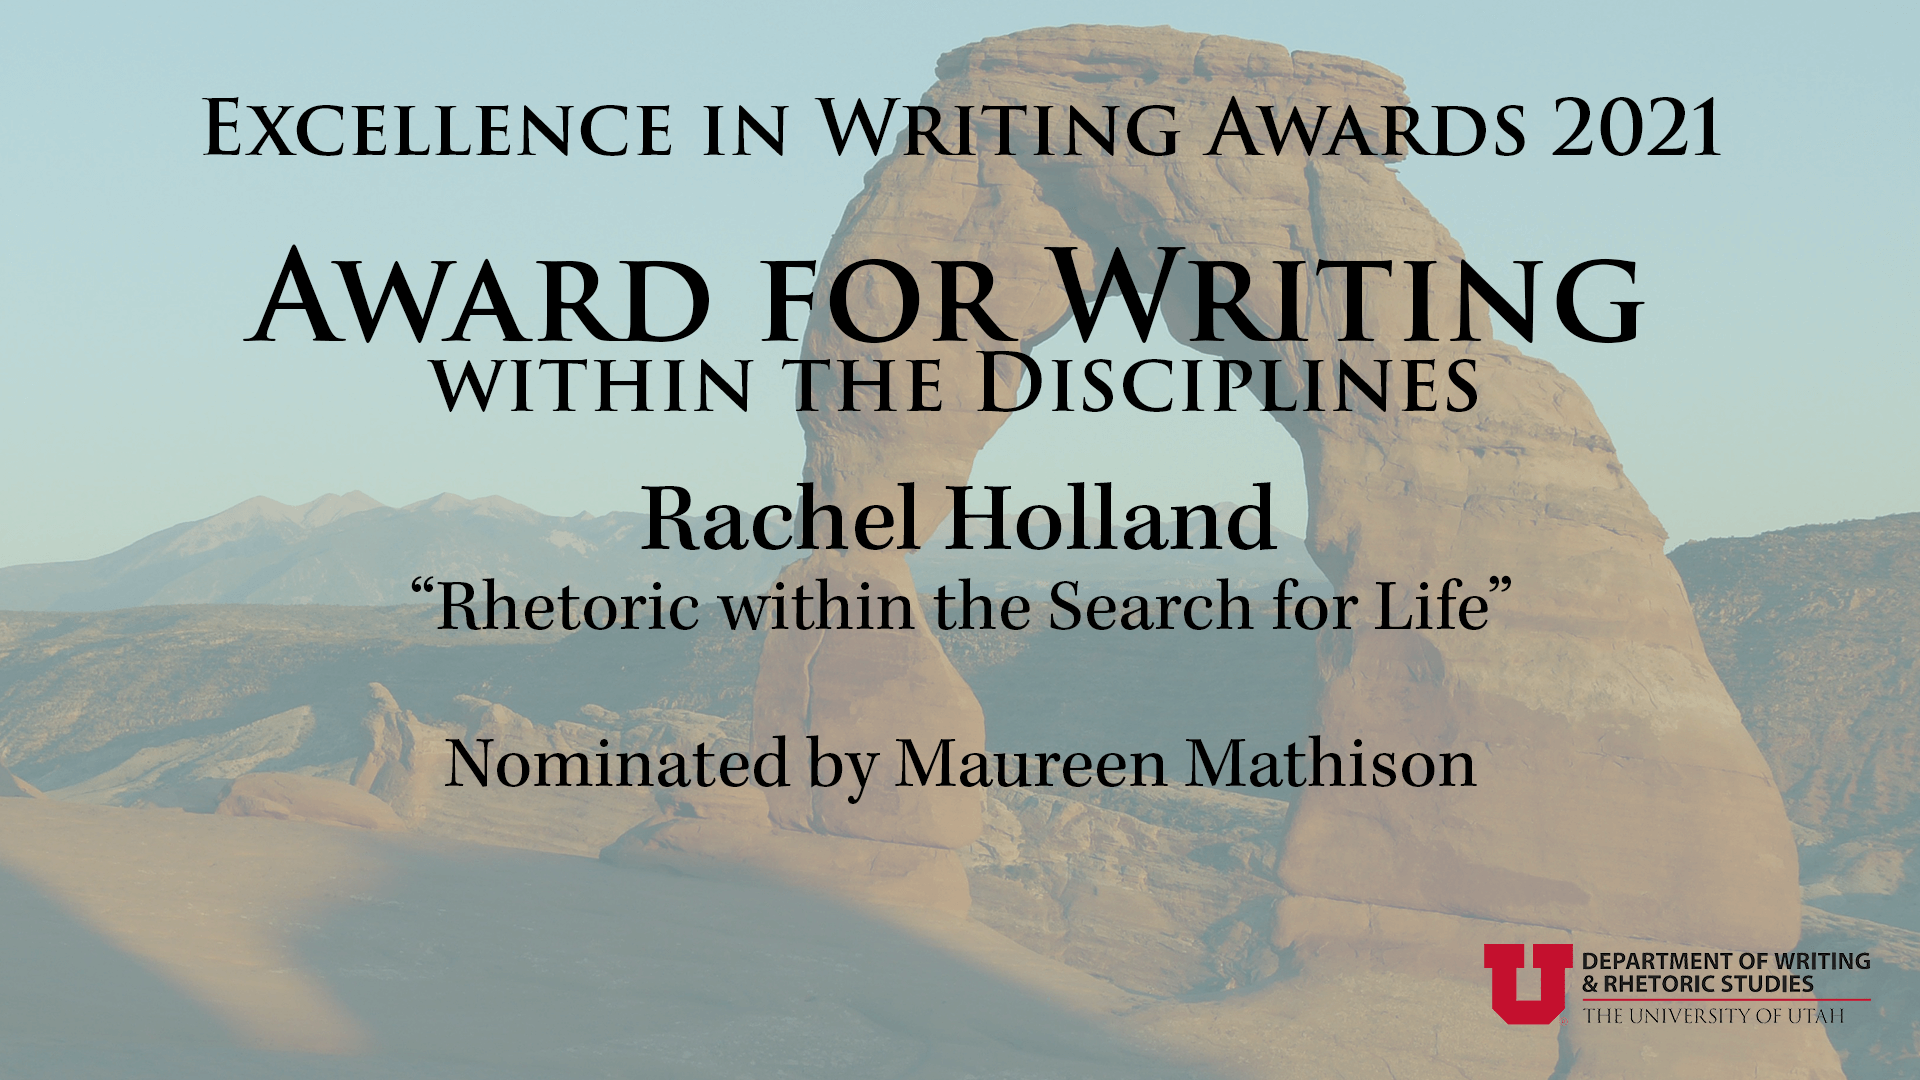 Writing within the Disciplines Award